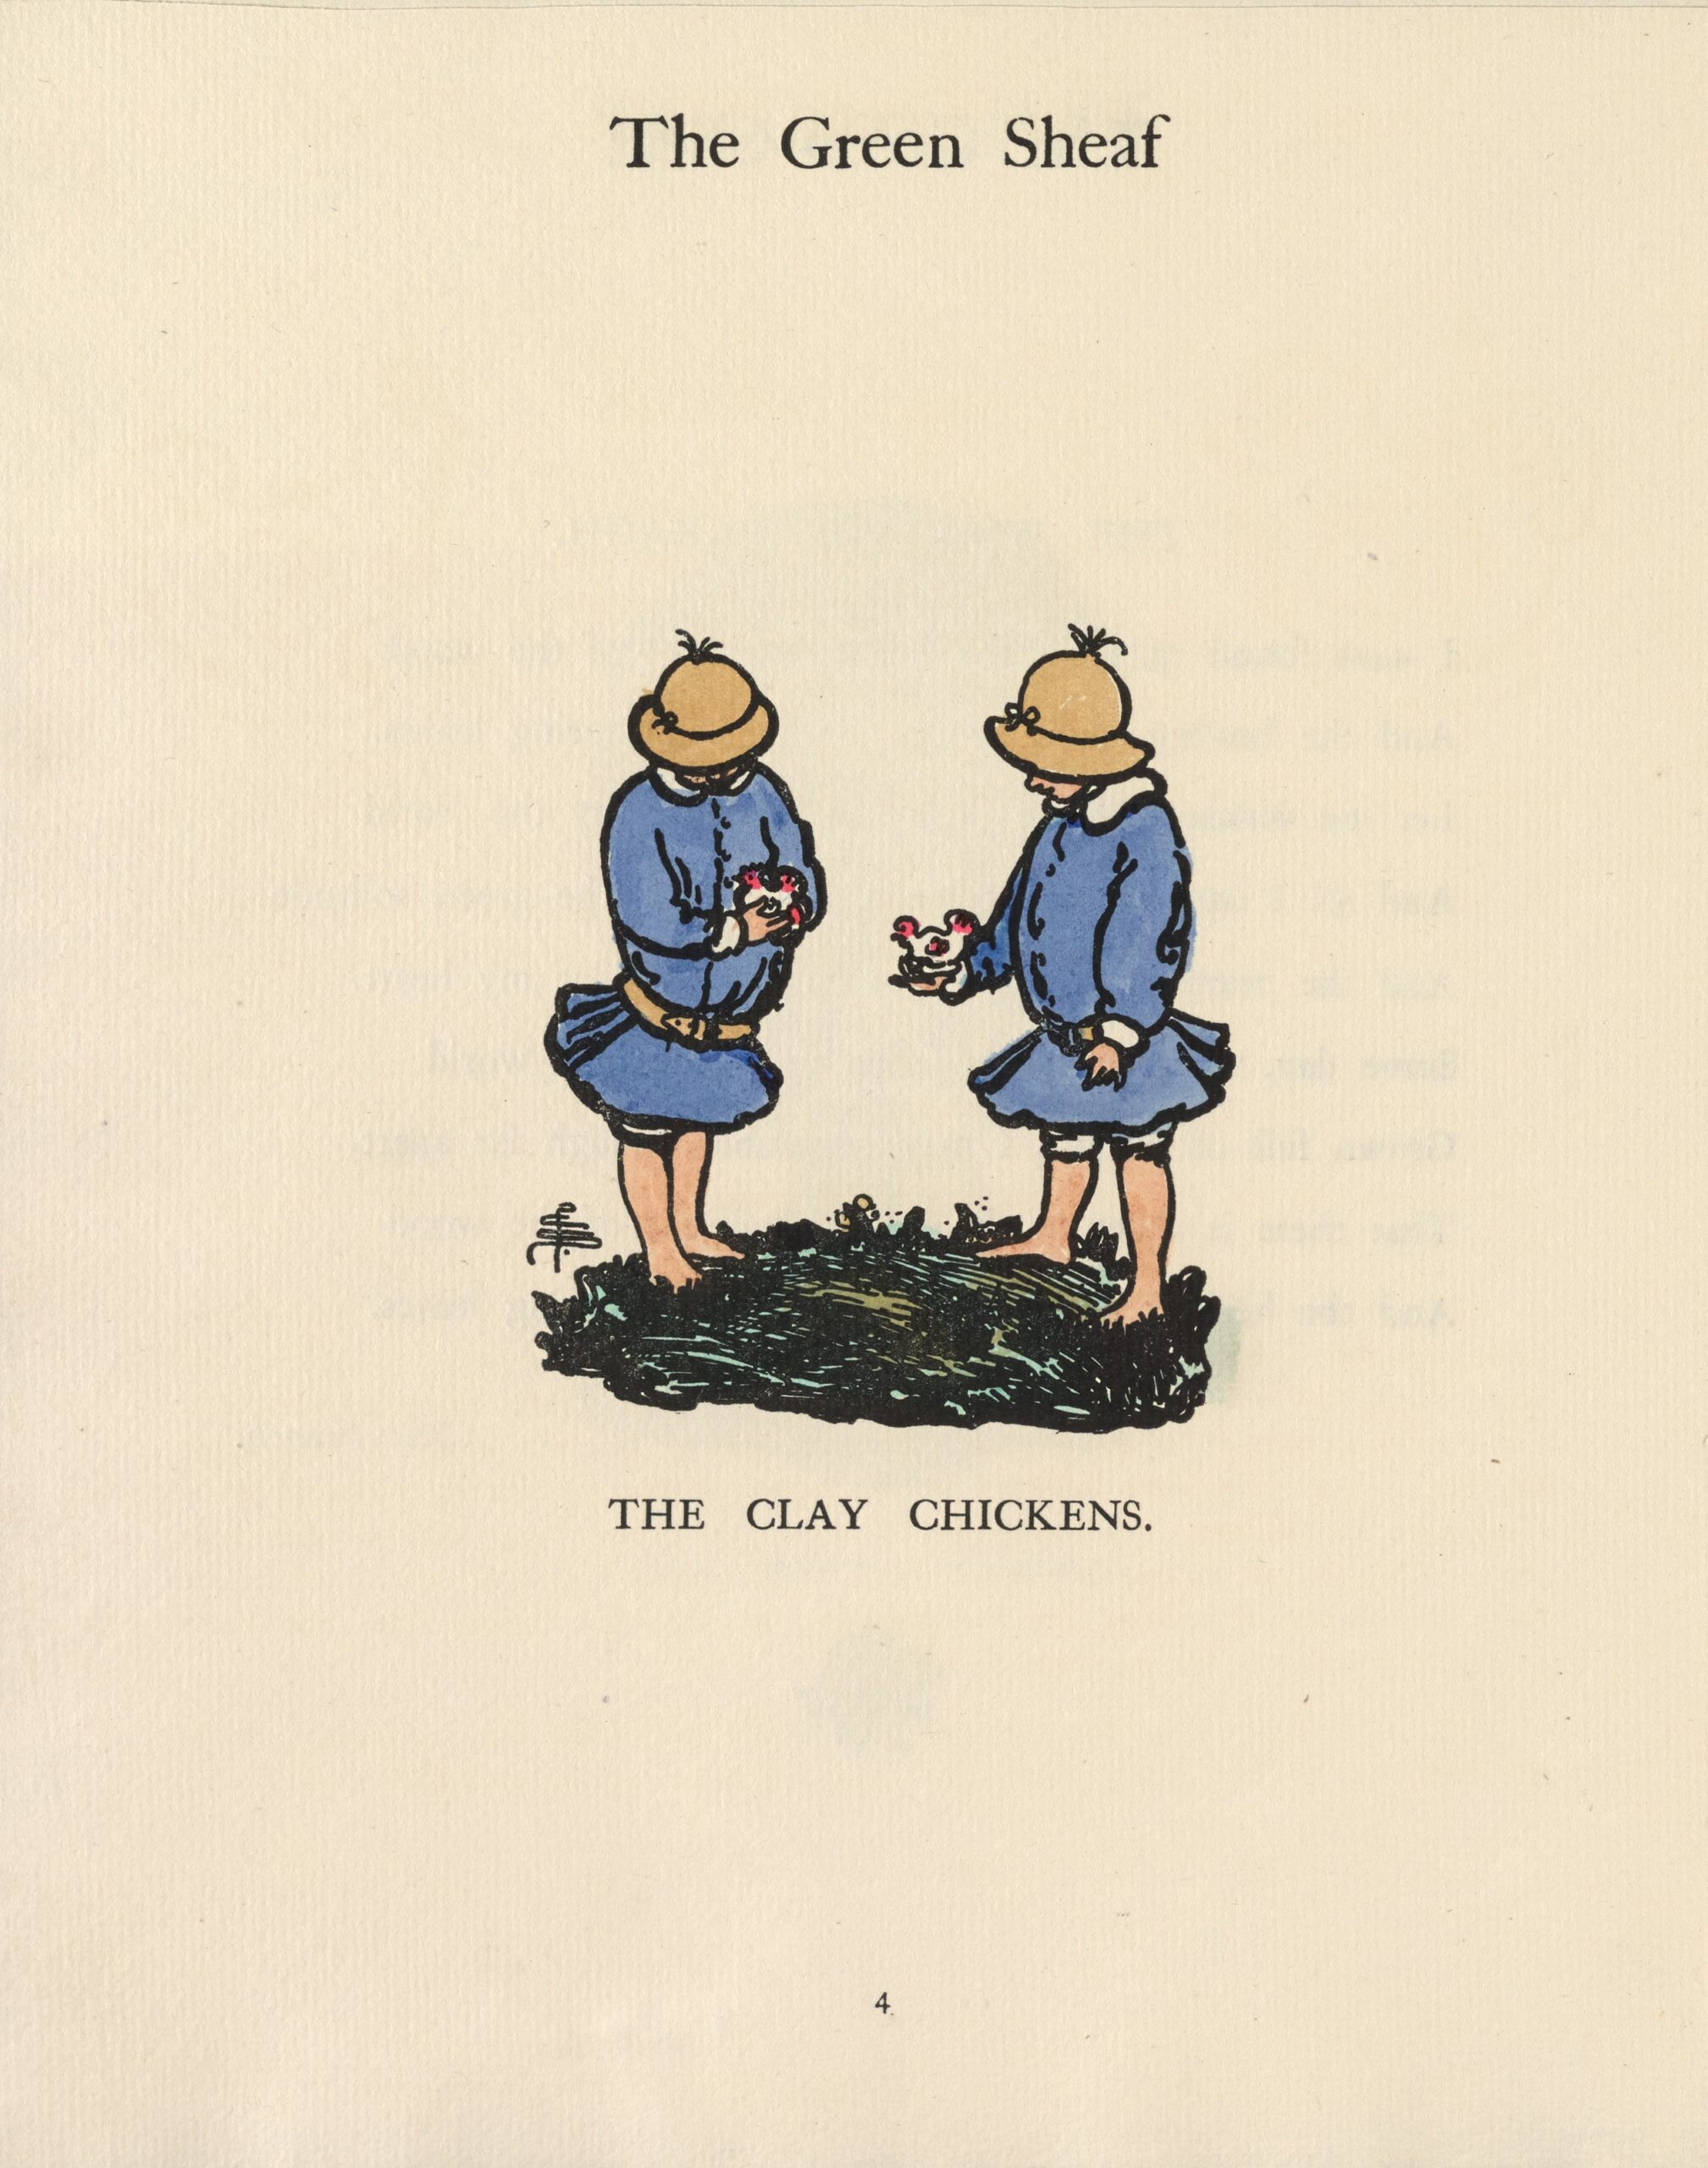 The hand-coloured illustration is centered on the page, unframed. Two children stand on a patch of green grass, wearing blue dresses with white collars and yellow-gold hats and belts. Their legs are bare. Their faces are downturned toward the red and white clay chickens they each hold in their hands. The artist’s monogram is at the bottom left of the grass. The title is set in all capitals beneath the image: “THE CLAY CHICKENS.”